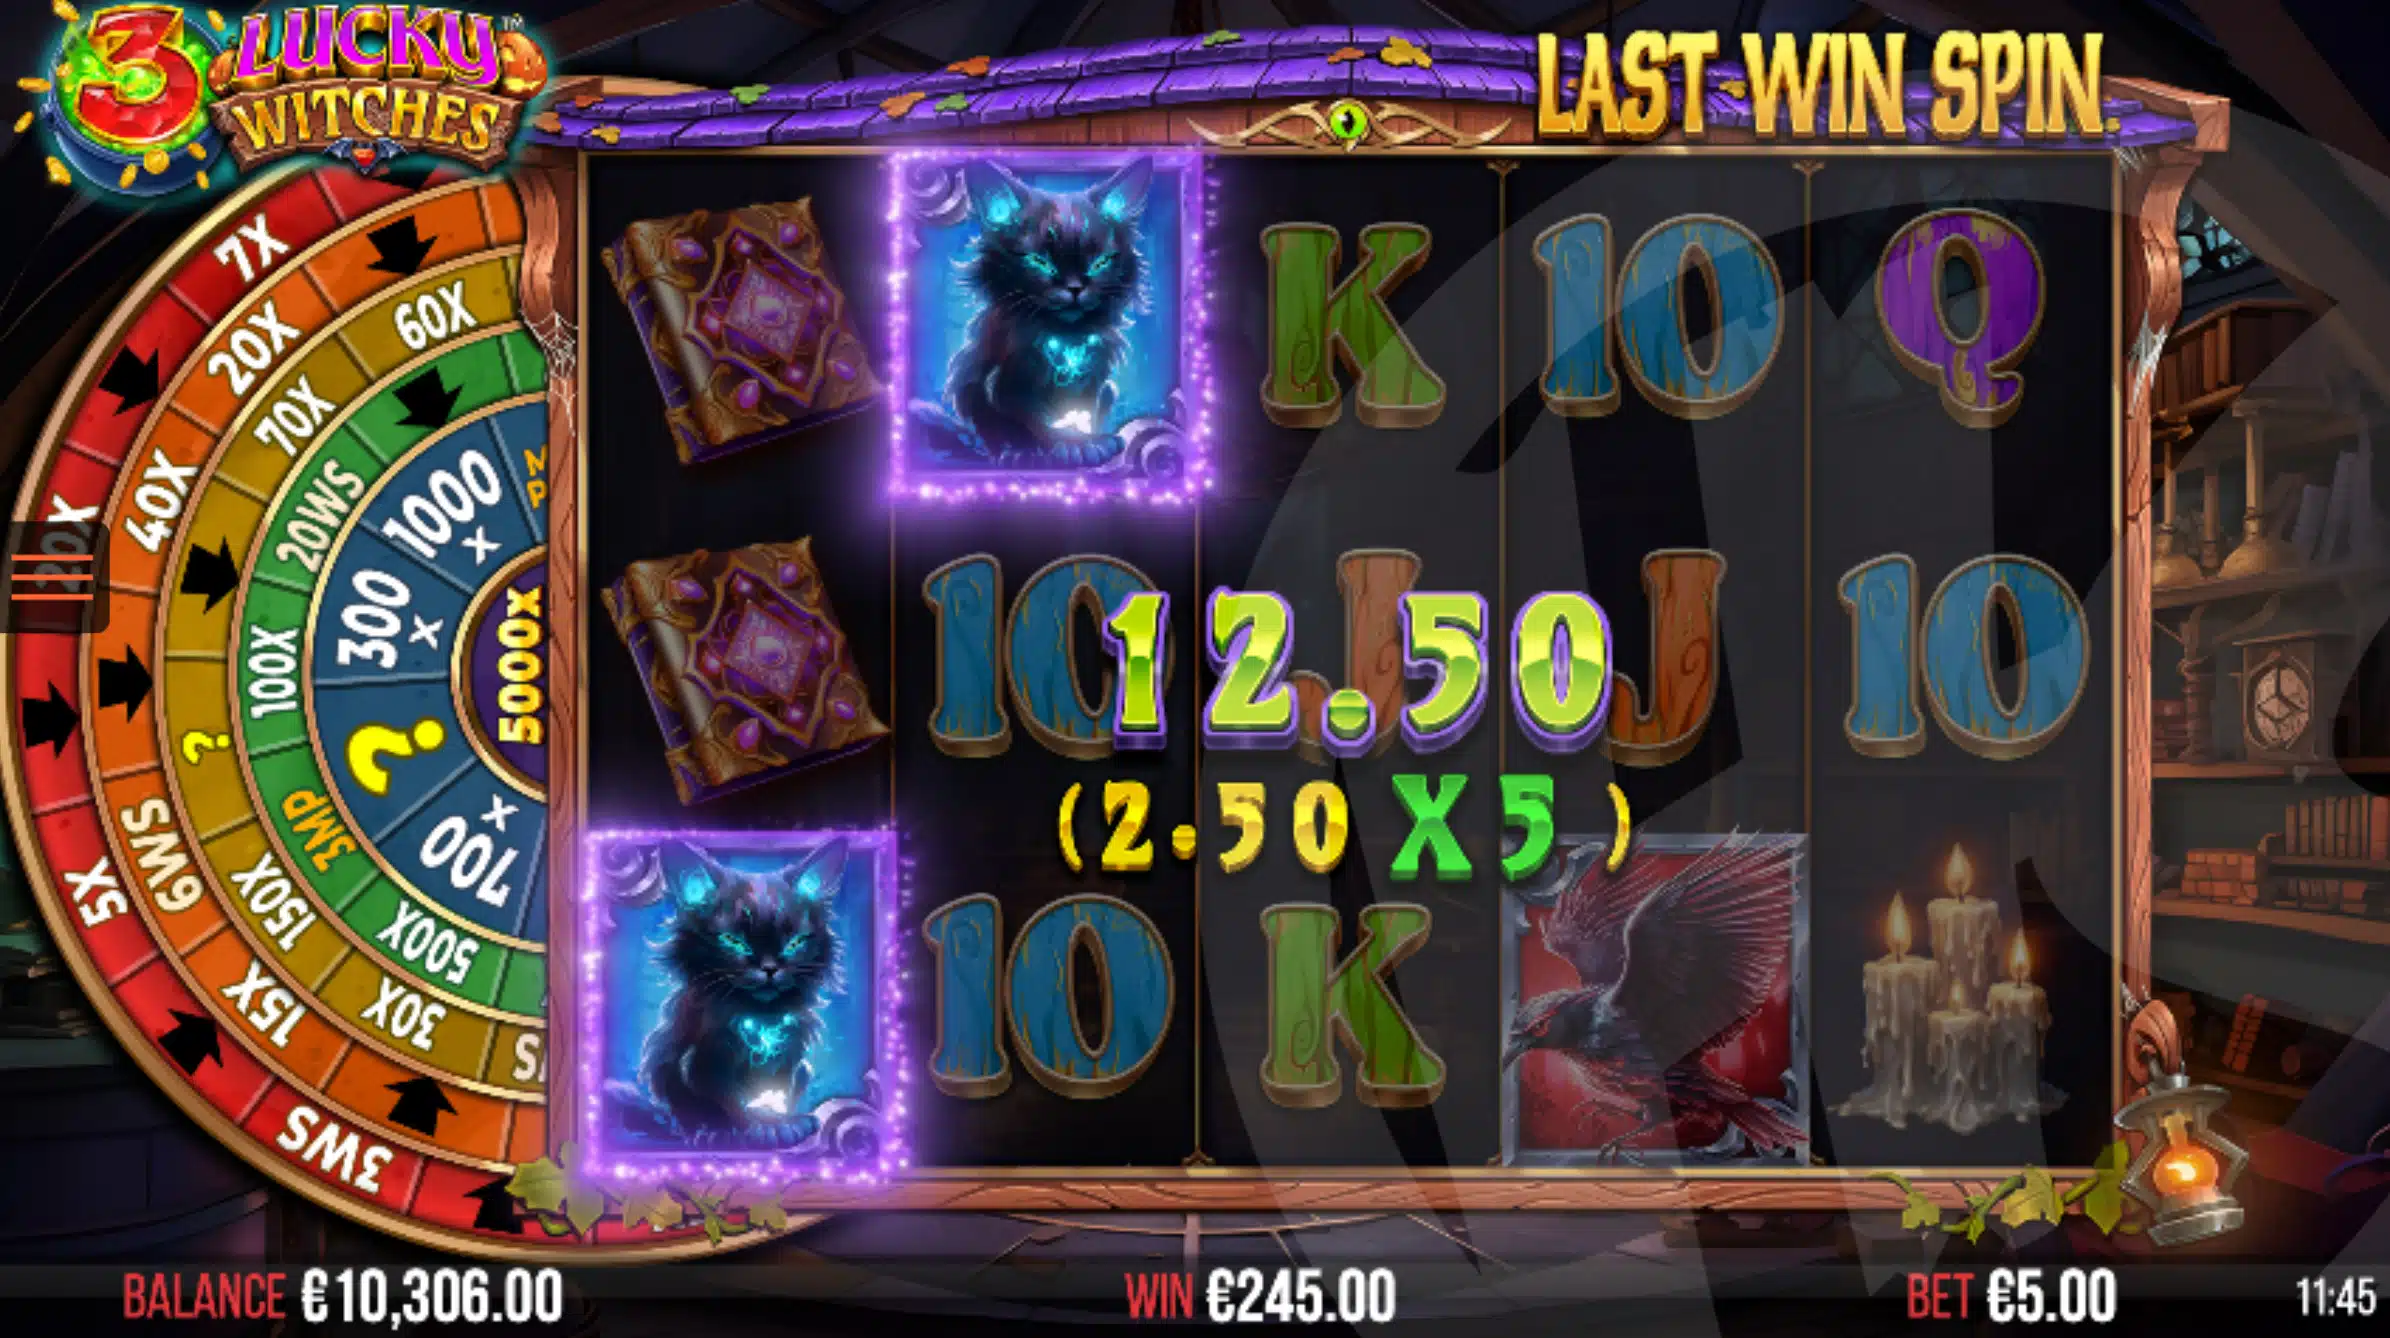 3 Lucky Witches Win Spins